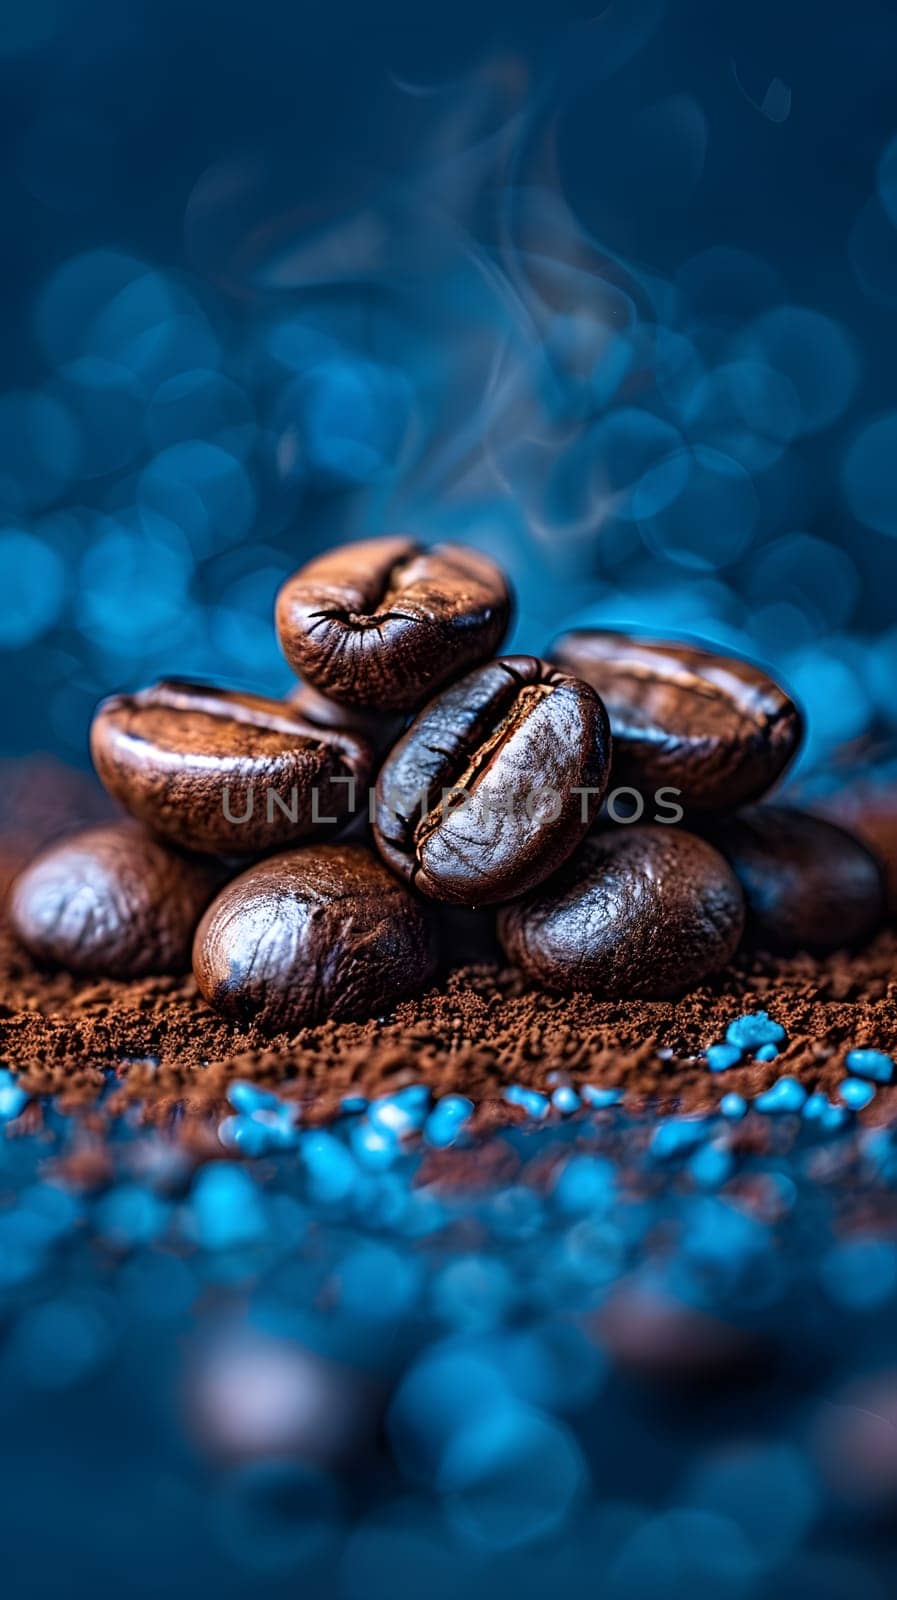 A beautiful still life photography of electric blue singleorigin coffee beans on a bed of freshly ground coffee, showcasing the sweet aroma of this plantbased ingredient